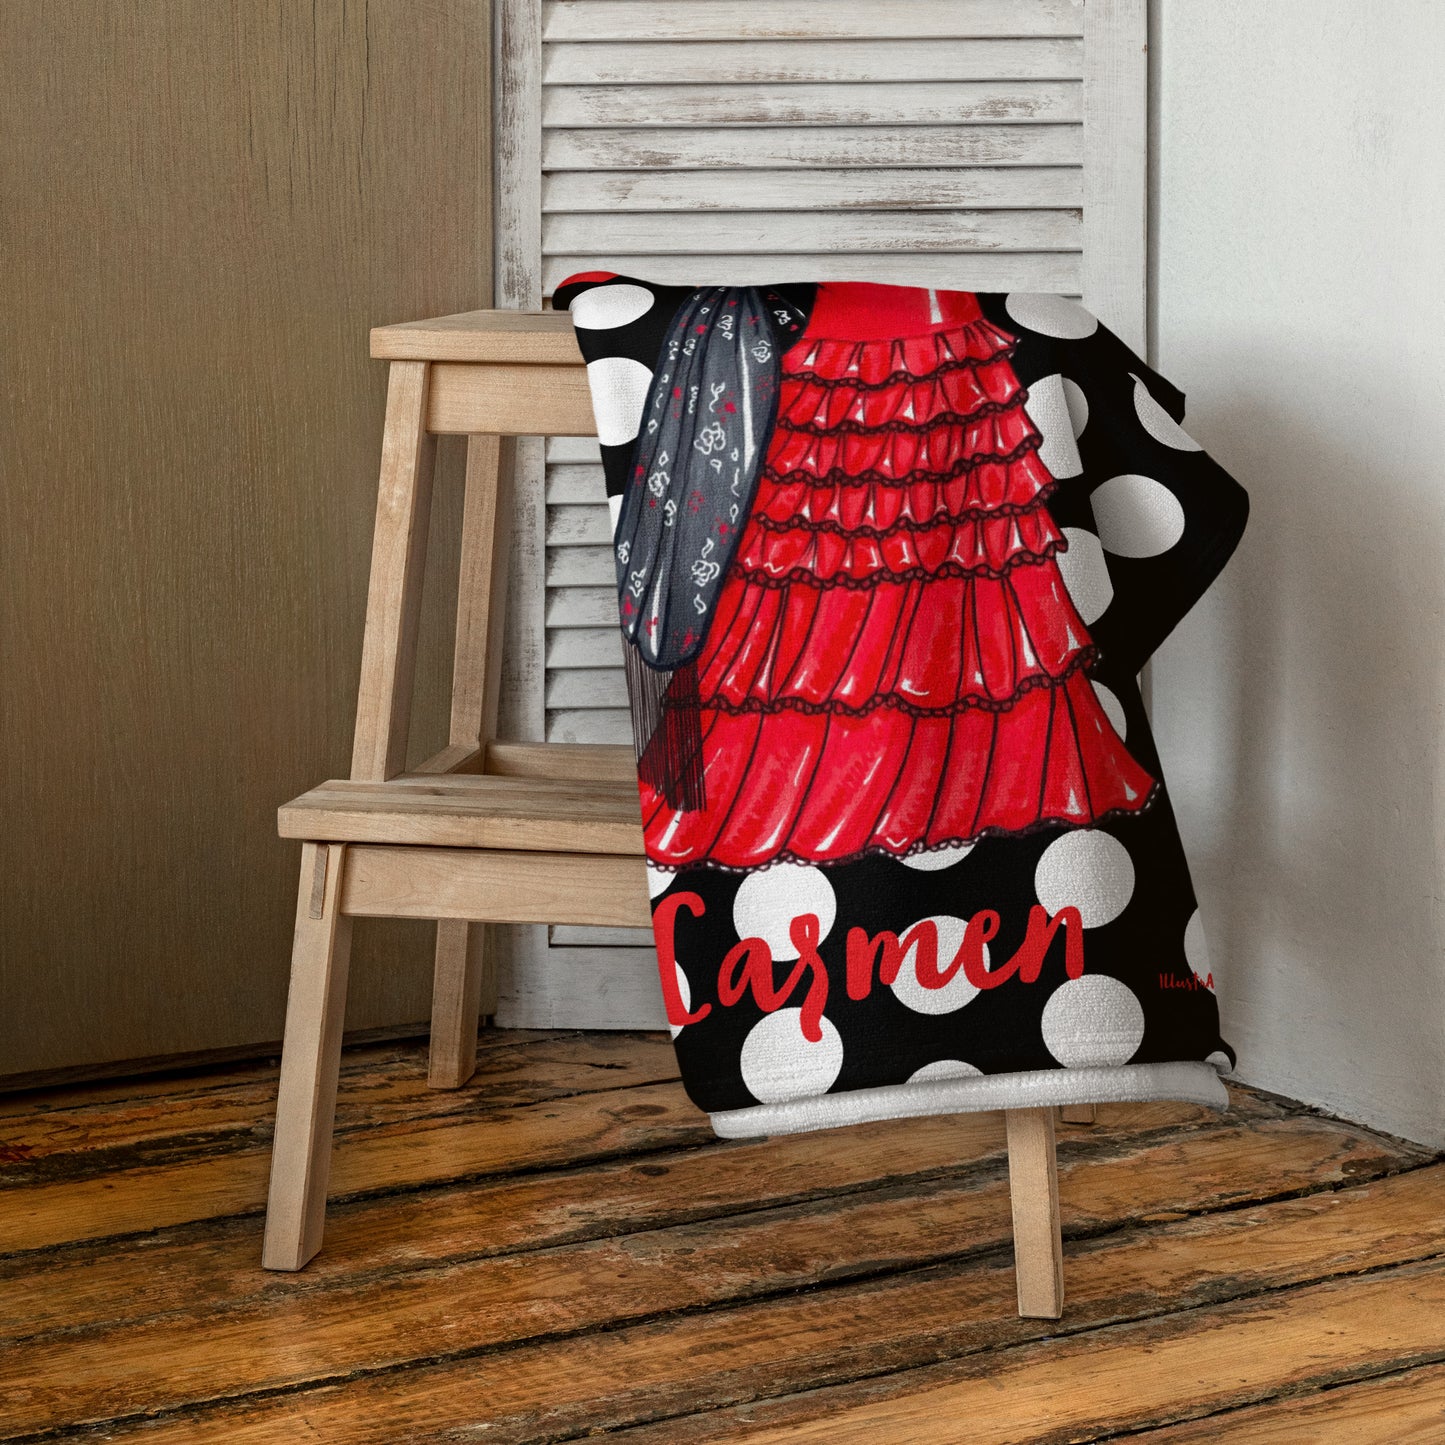 a chair with a red dress on it